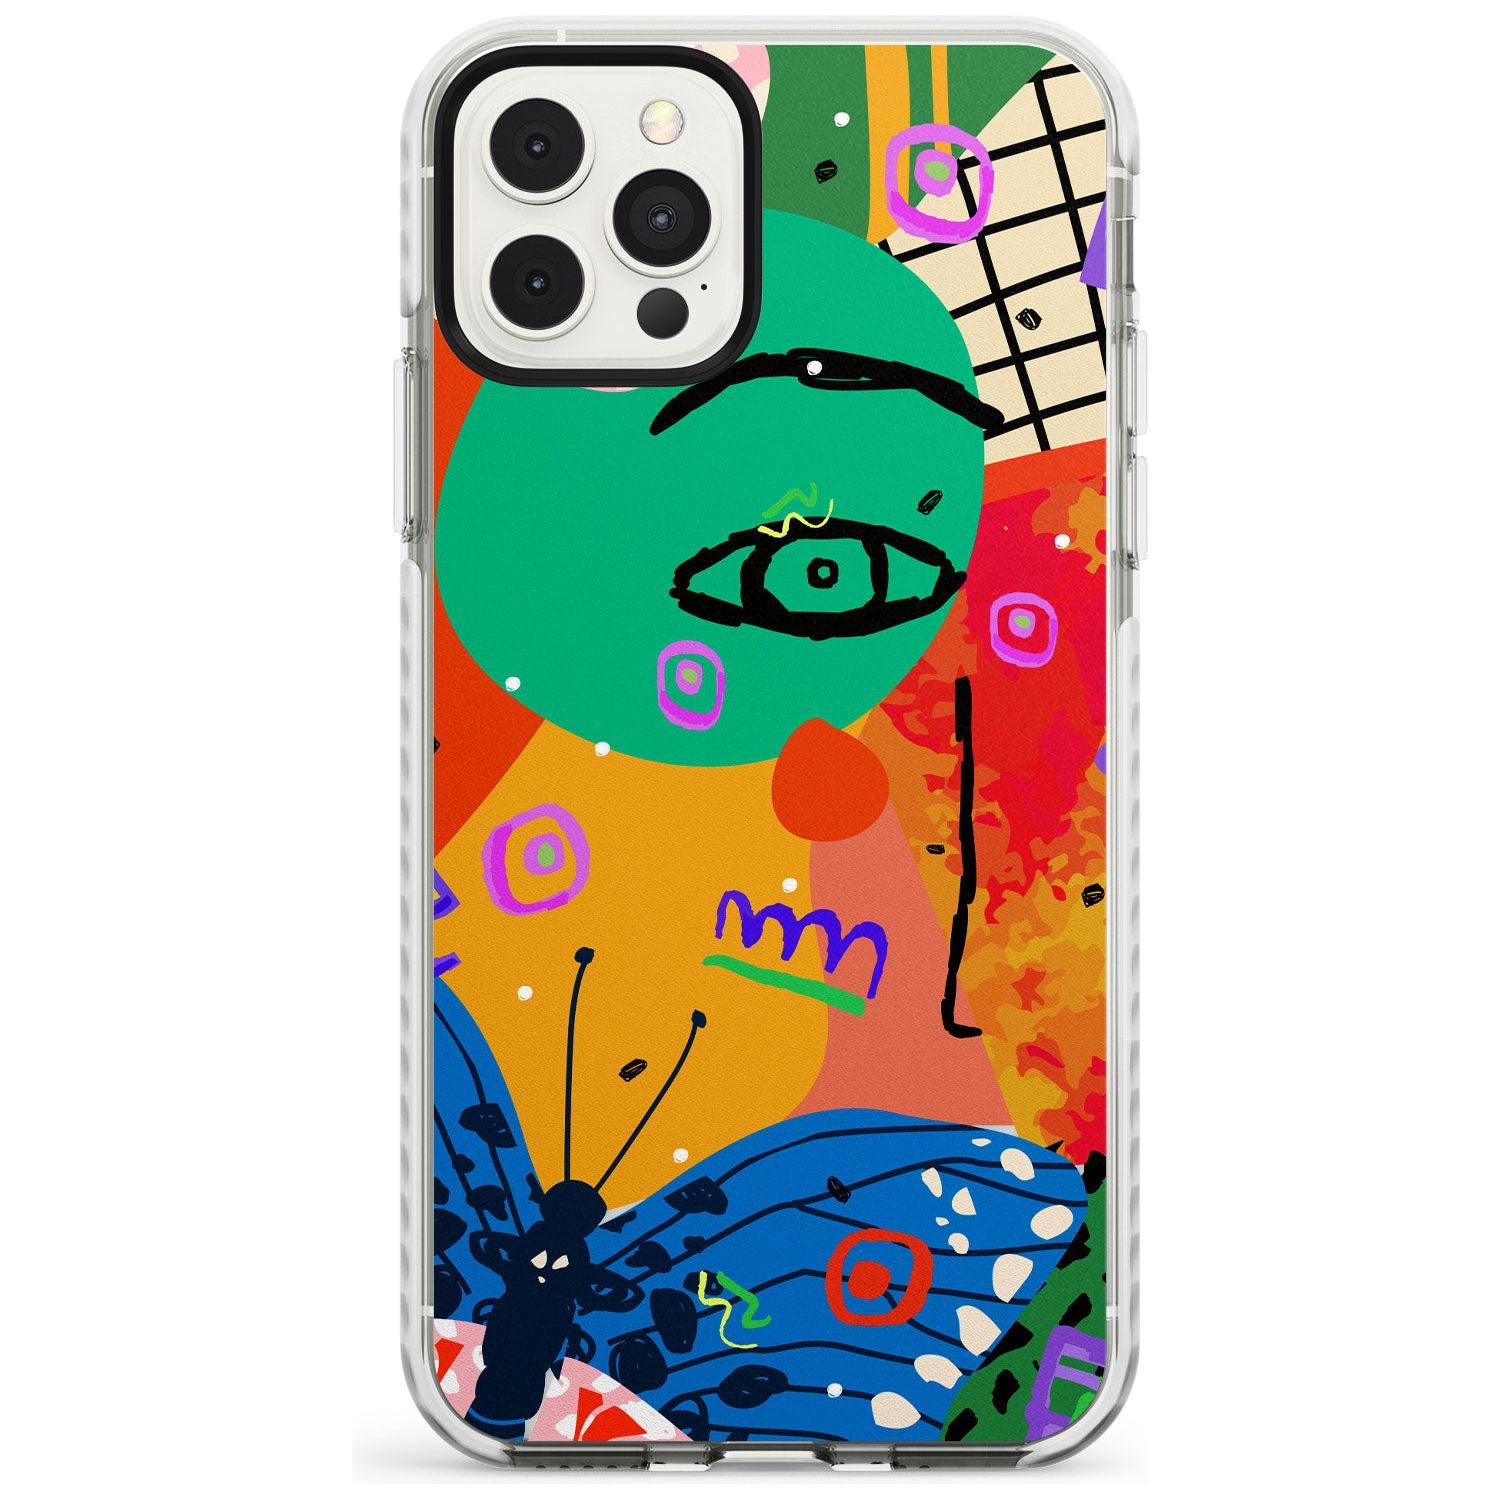 Abstract Butterfly Slim TPU Phone Case for iPhone 11 Pro Max